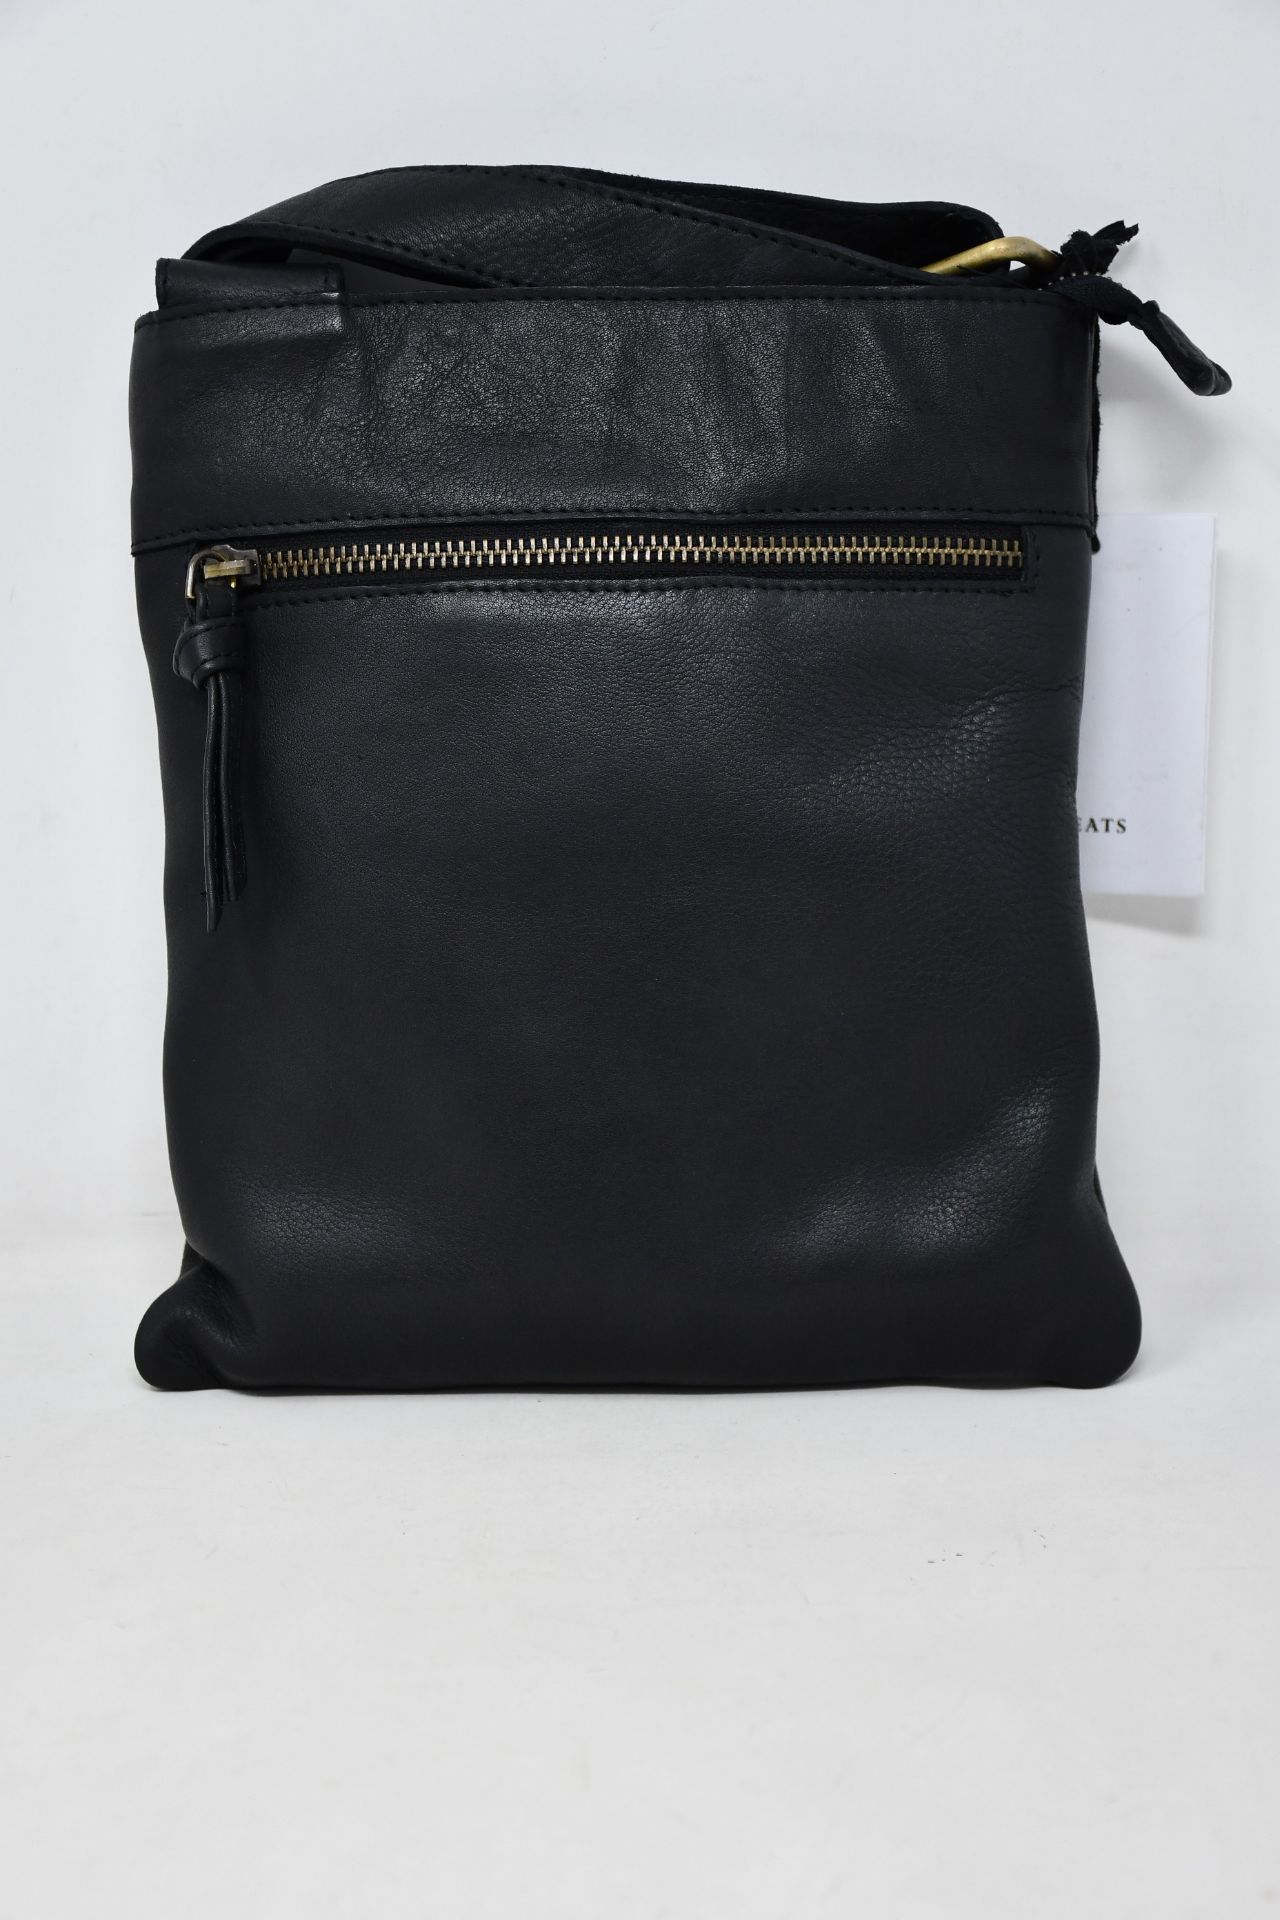 An as new Treats Kamma Common leather bag in black.